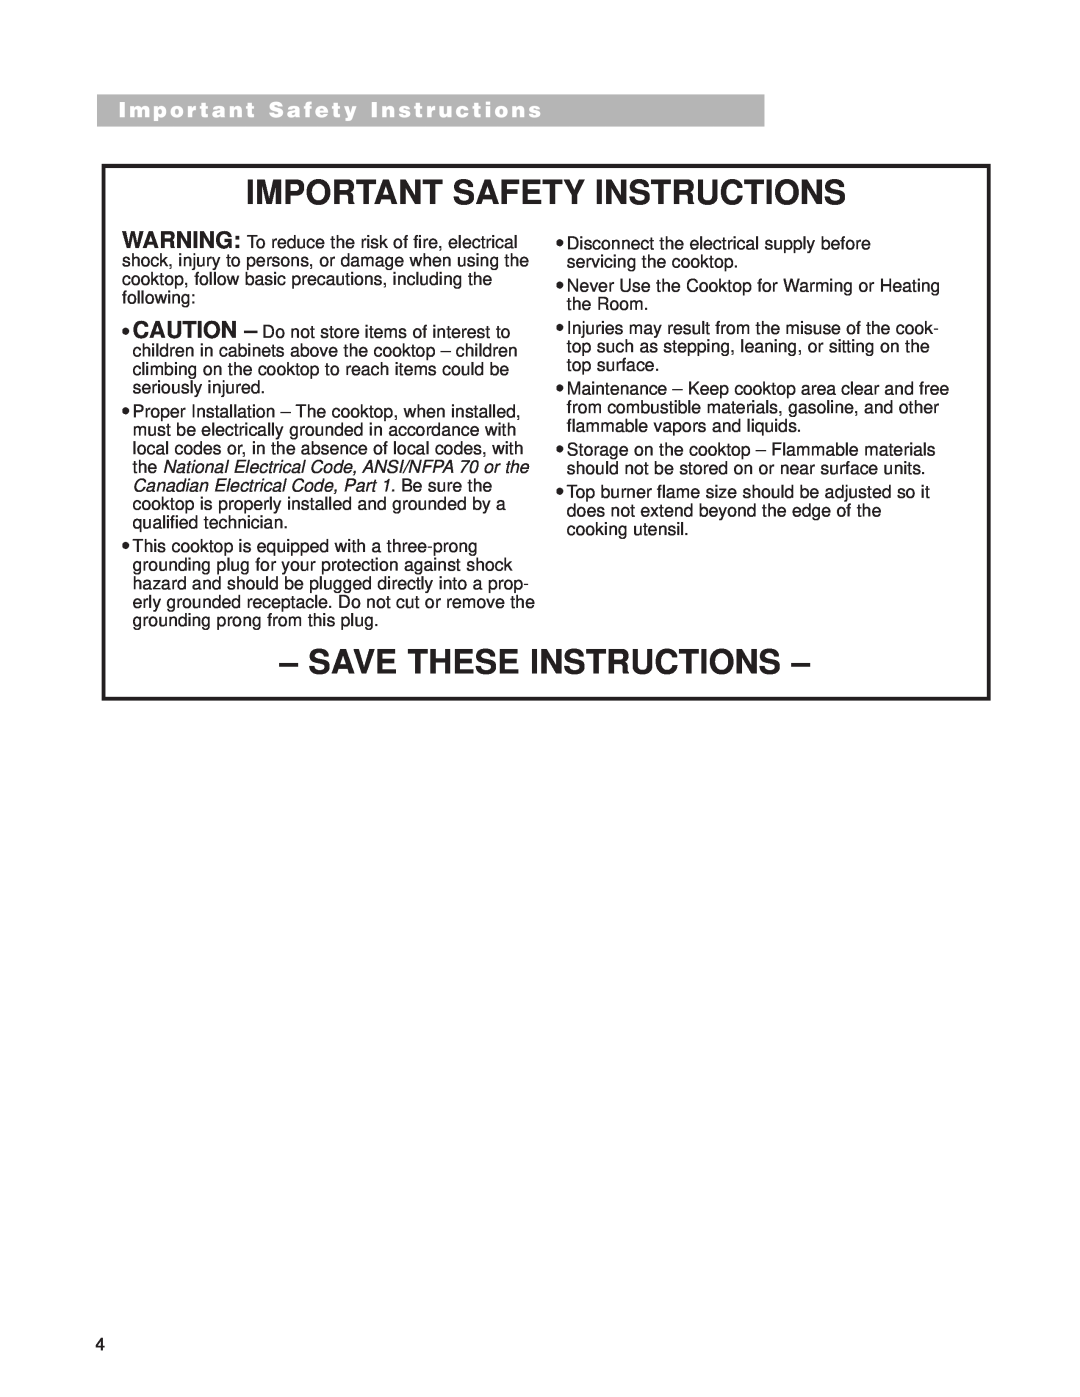 Whirlpool GLT3614G, SCS3614G, SCS3014G, SCS3004G, GLT3014G Important Safety Instructions, Save These Instructions 